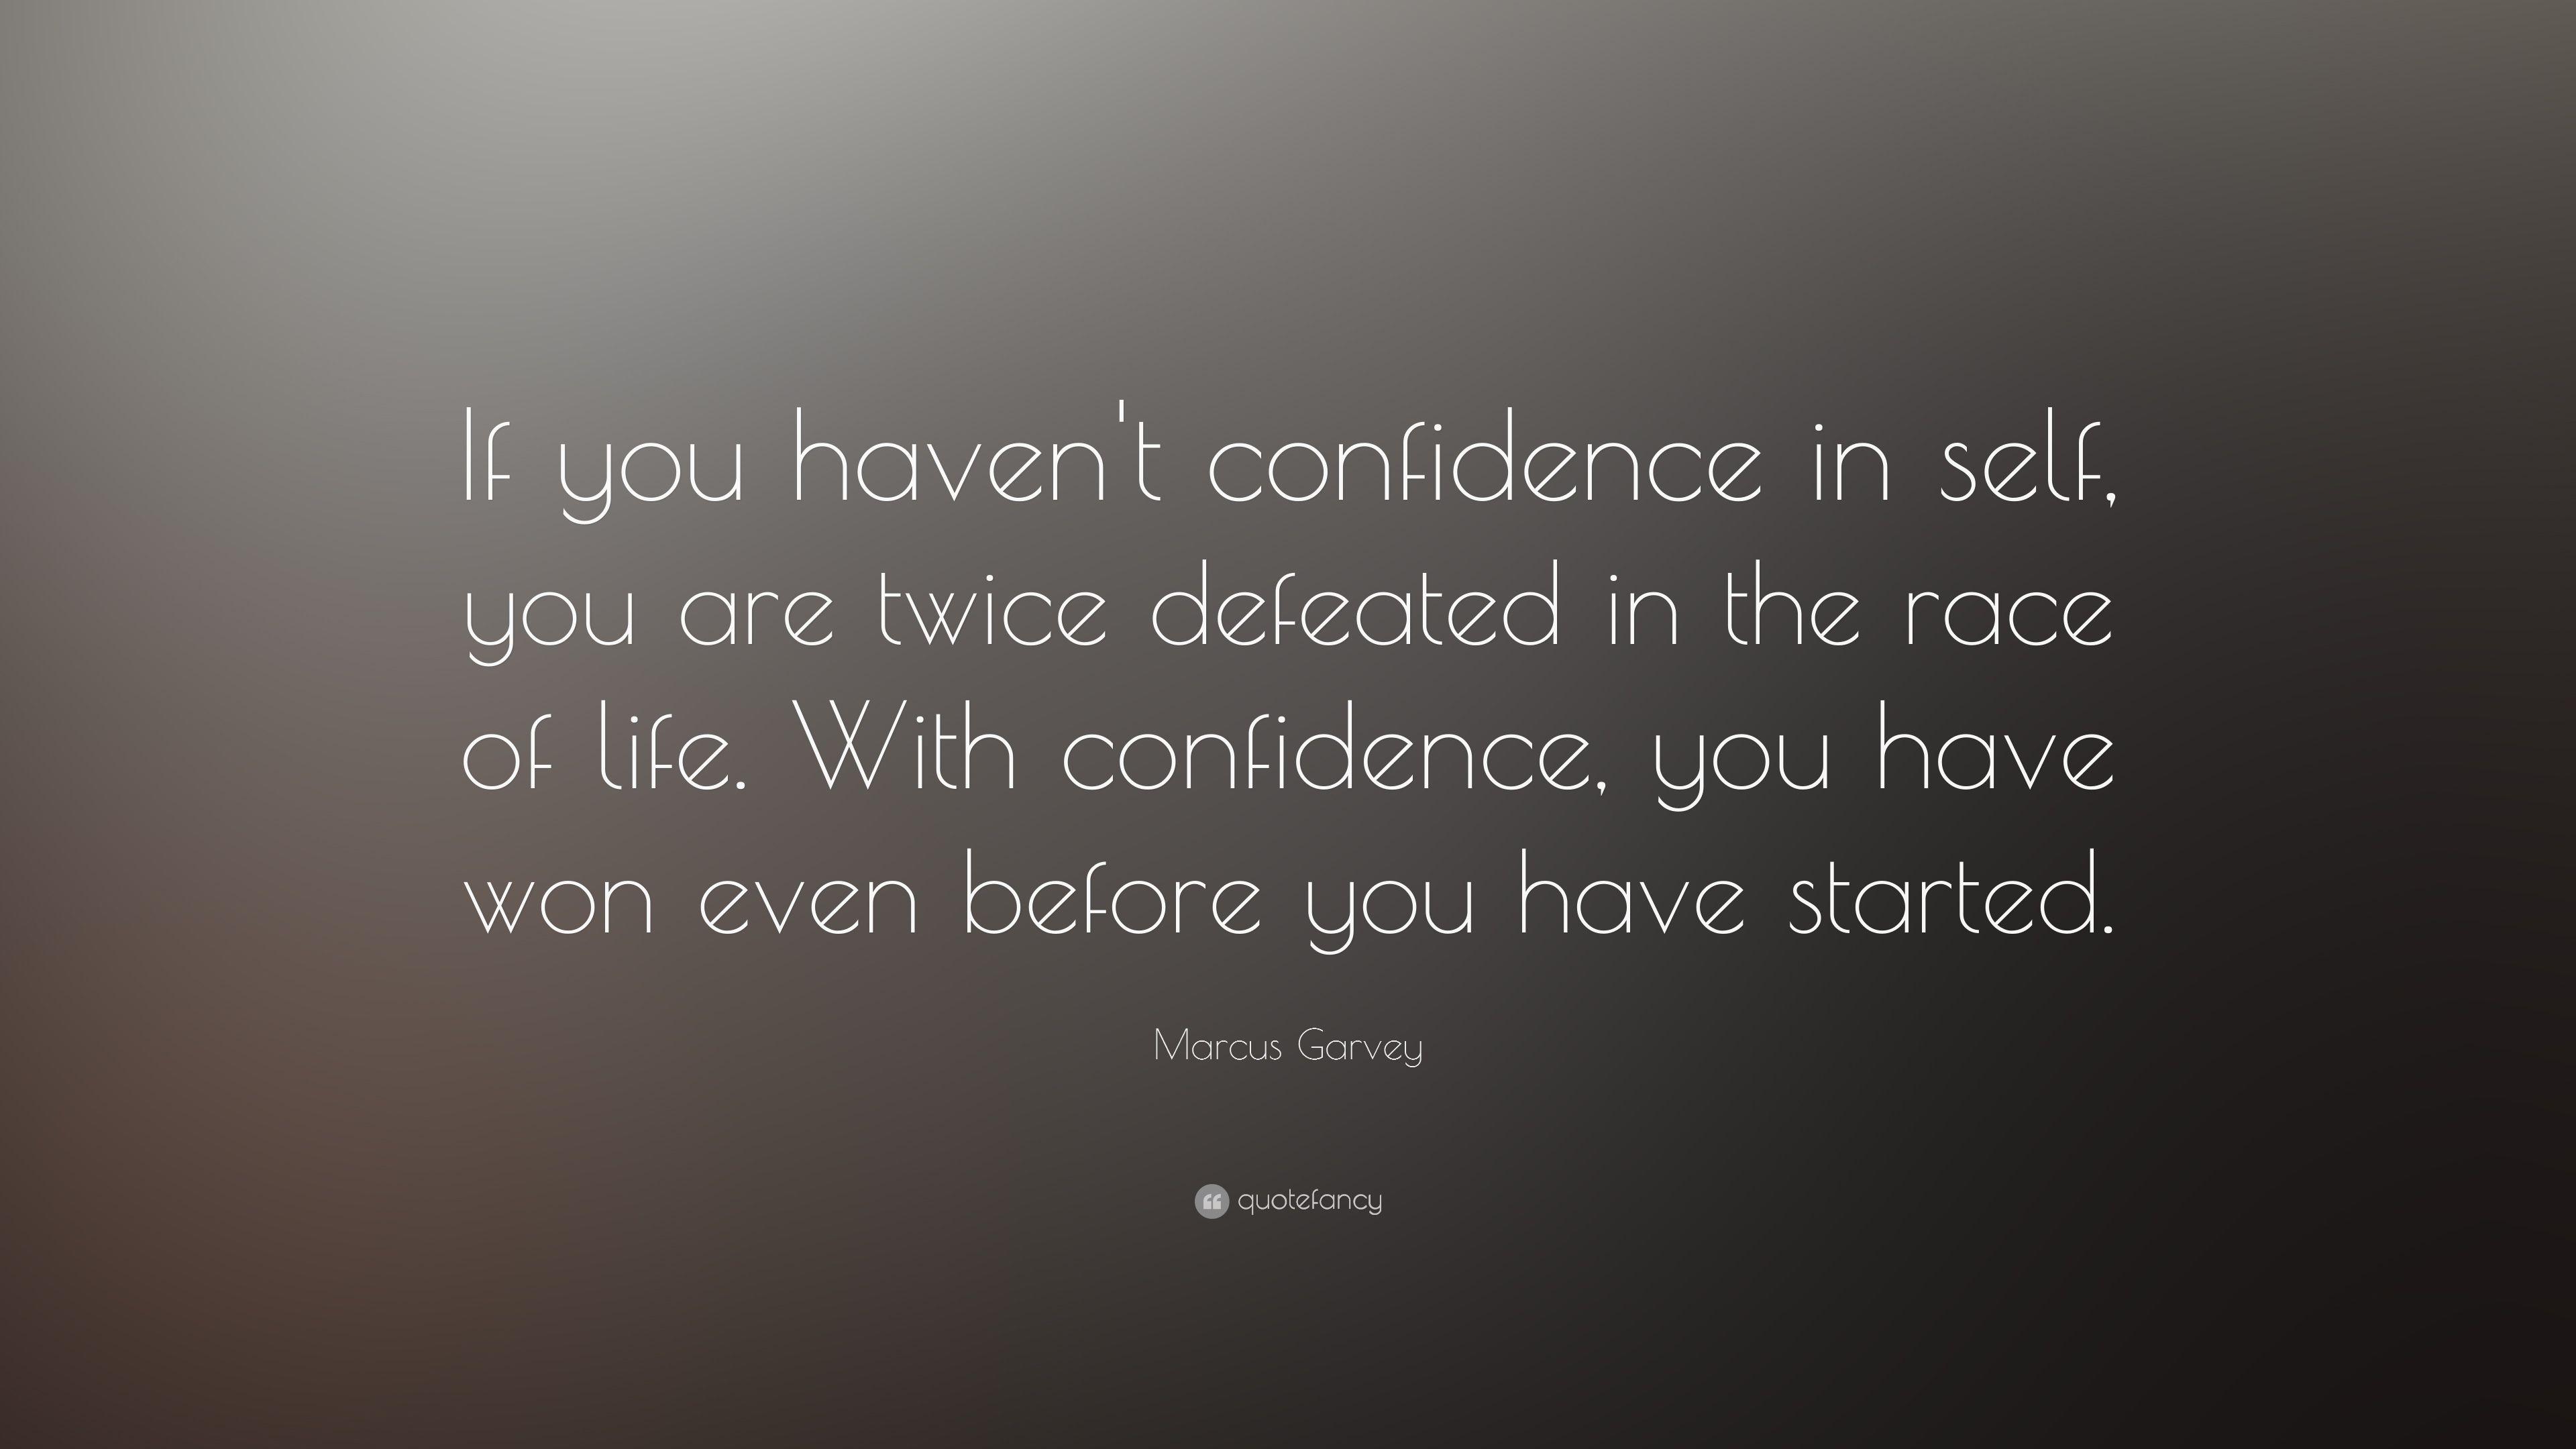 Marcus Garvey Quote: “If you haven't confidence in self, you are